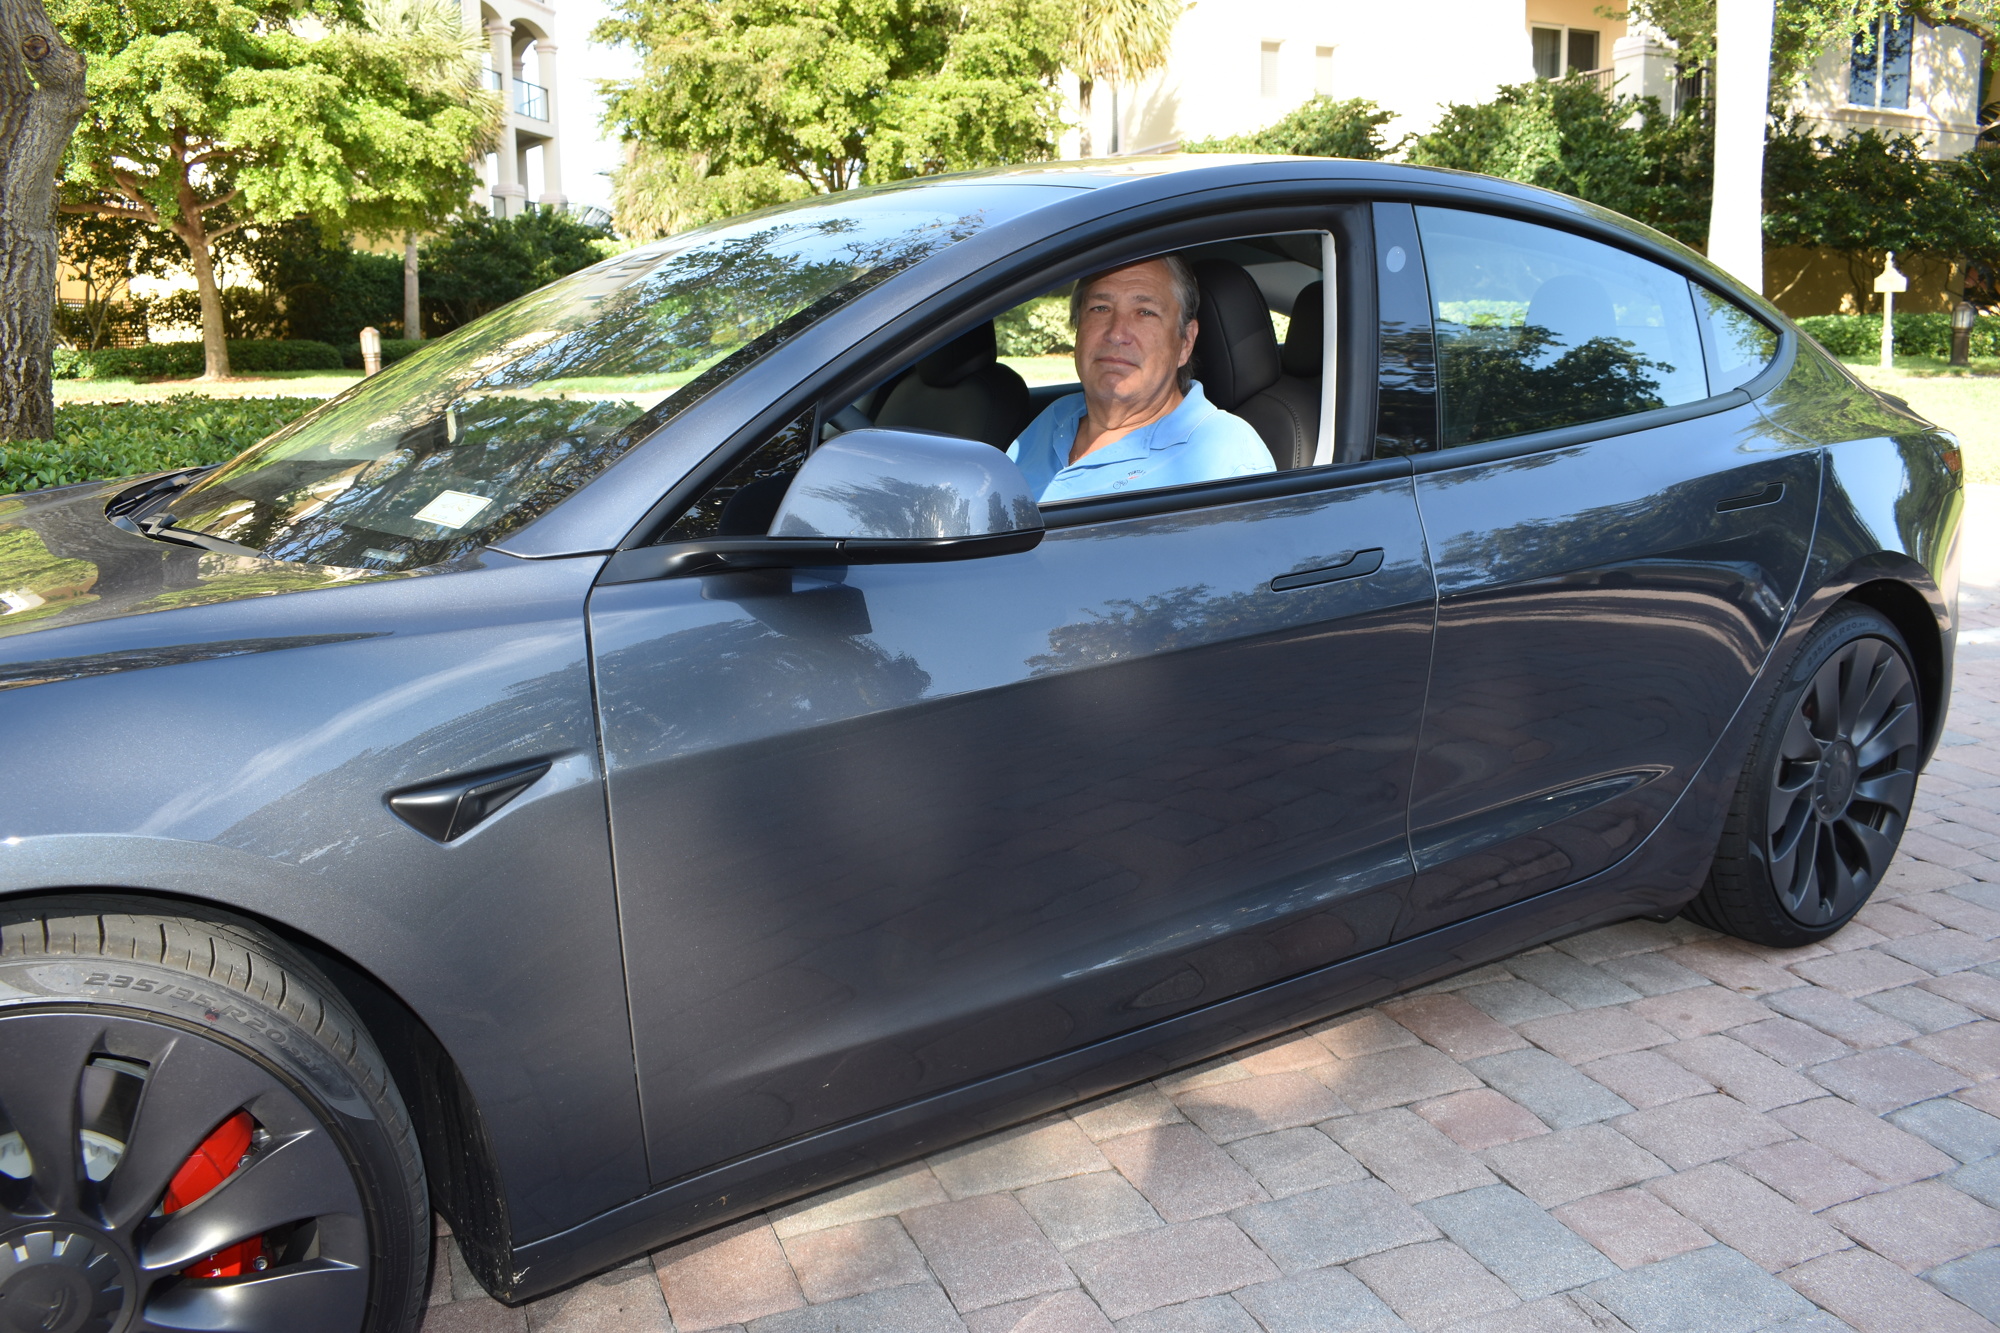 Longboat Key resident Tim Williams bought his Tesla earlier this year.